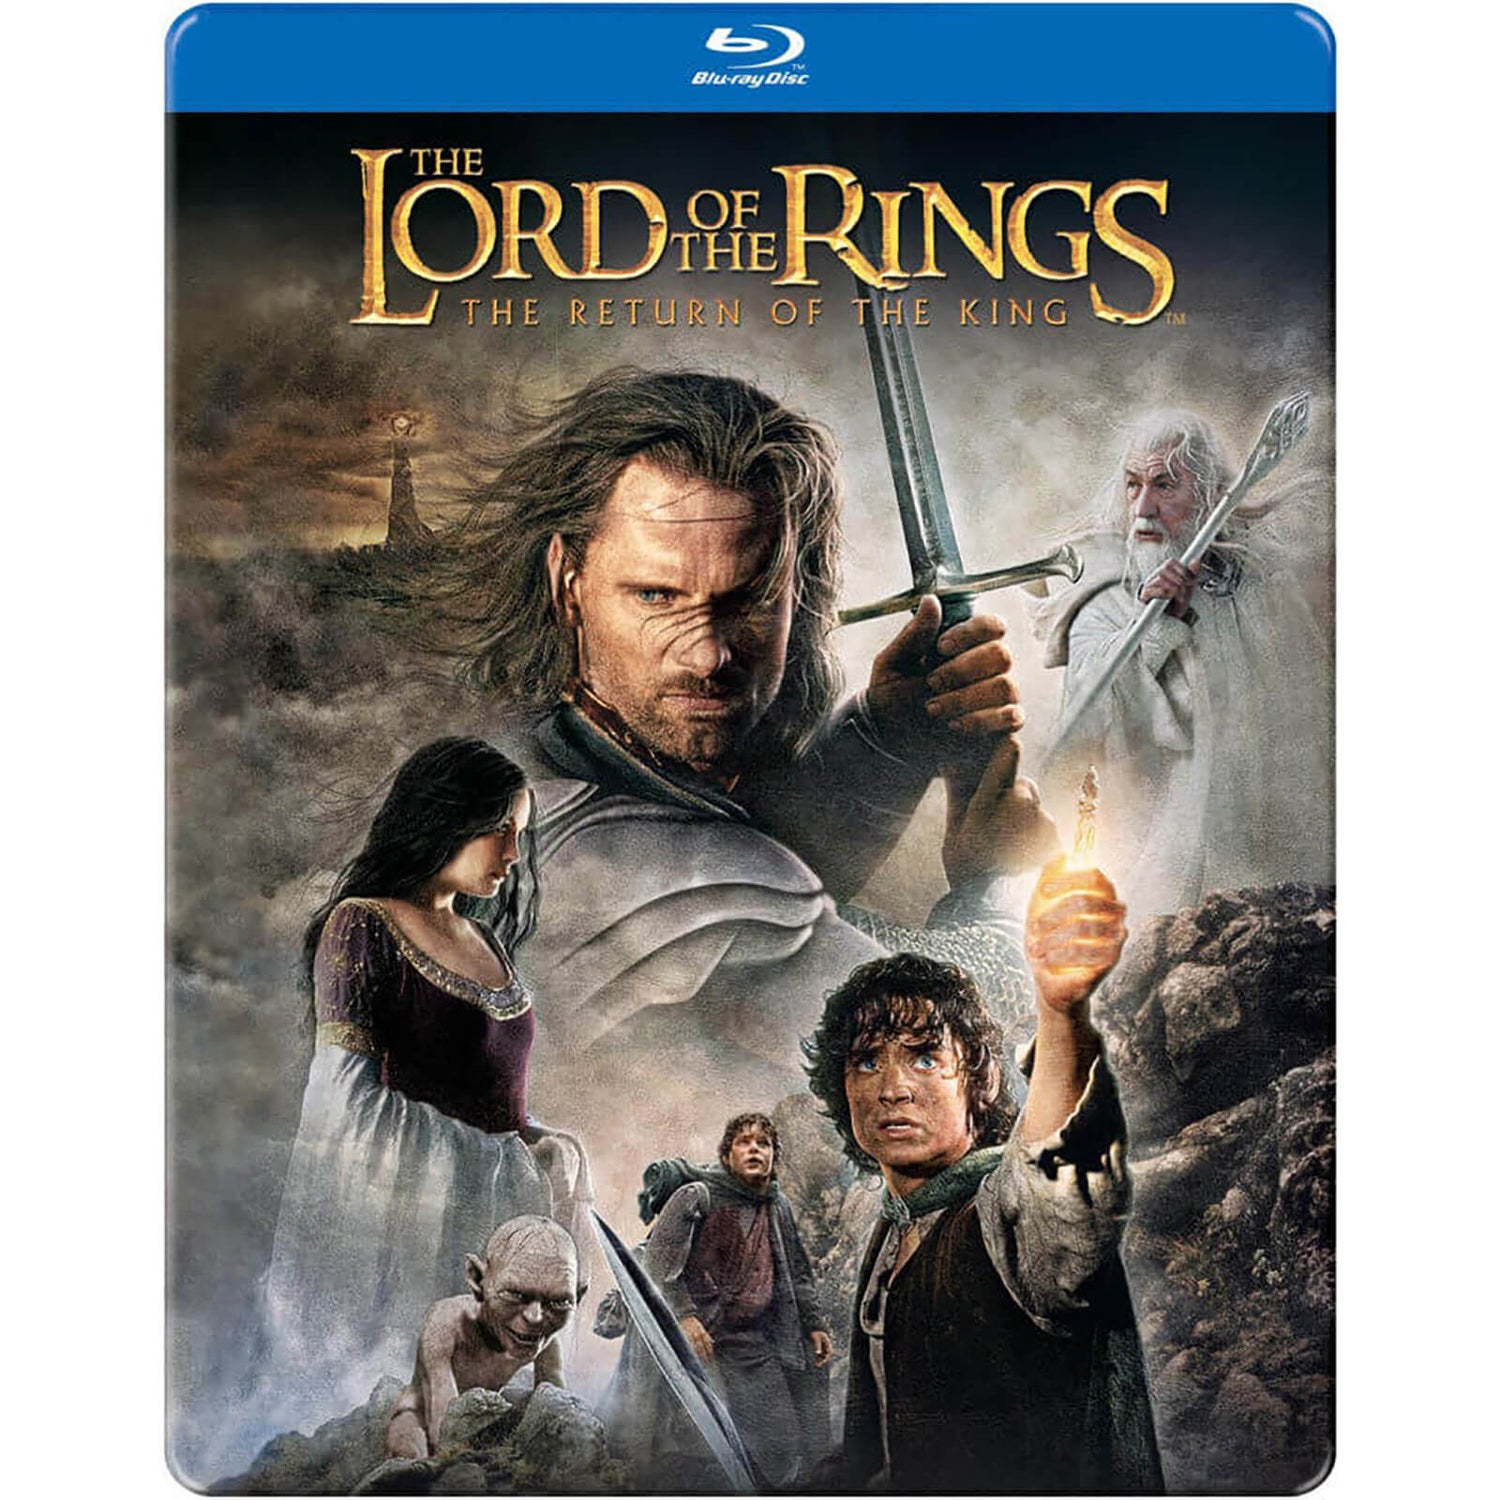 Lord of Rings: Return of the King [Blu-ray] [US Import]